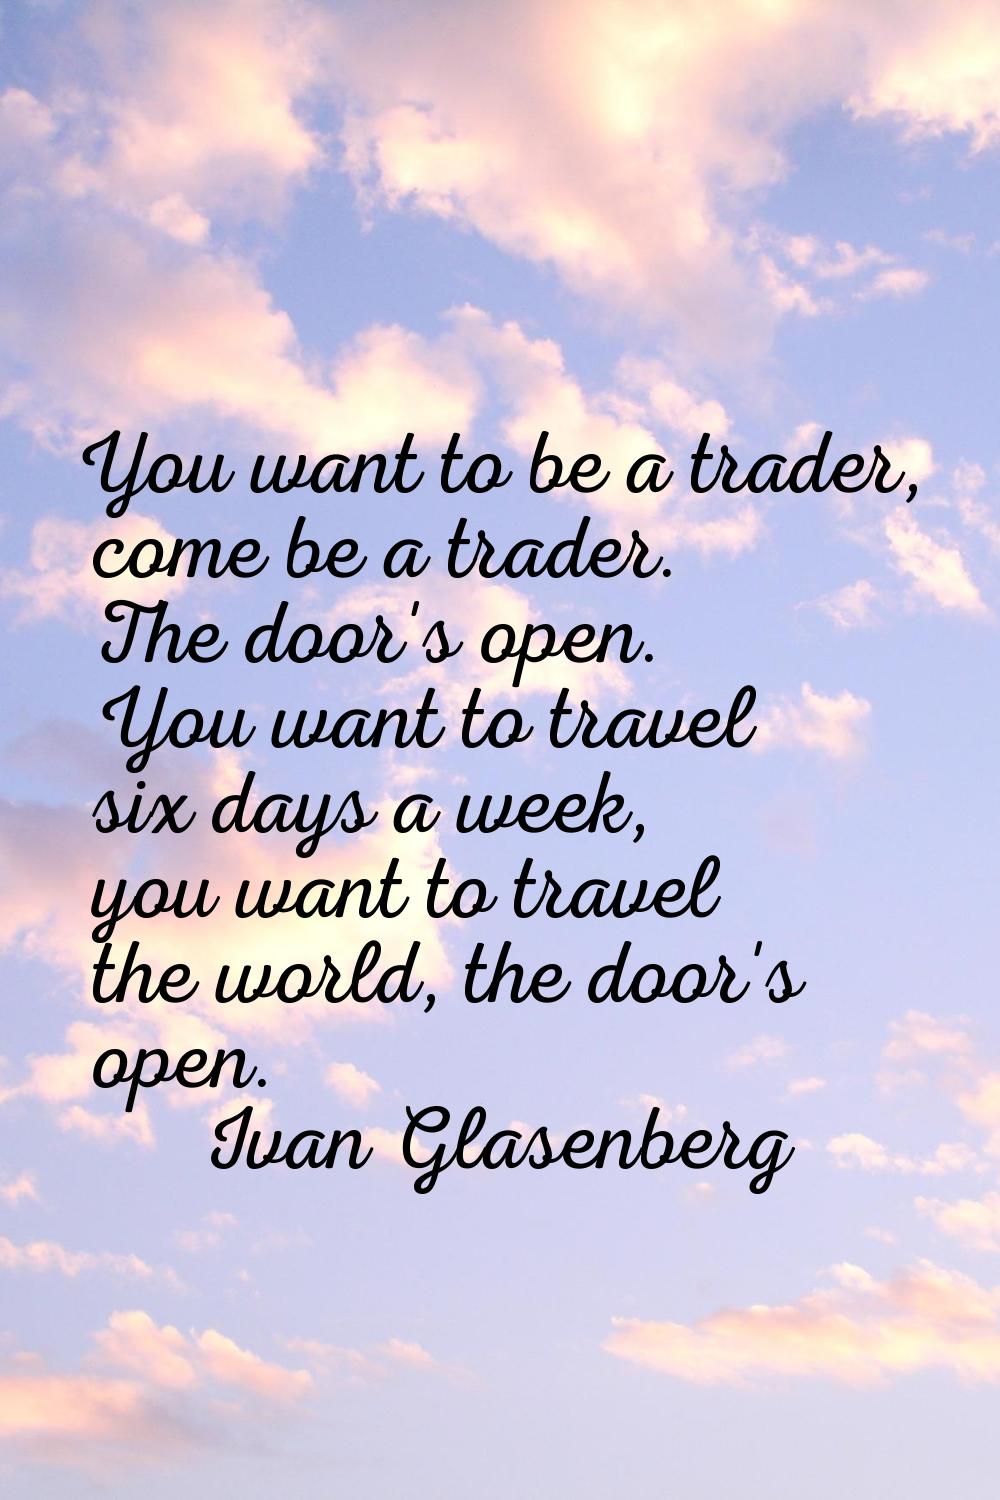 You want to be a trader, come be a trader. The door's open. You want to travel six days a week, you